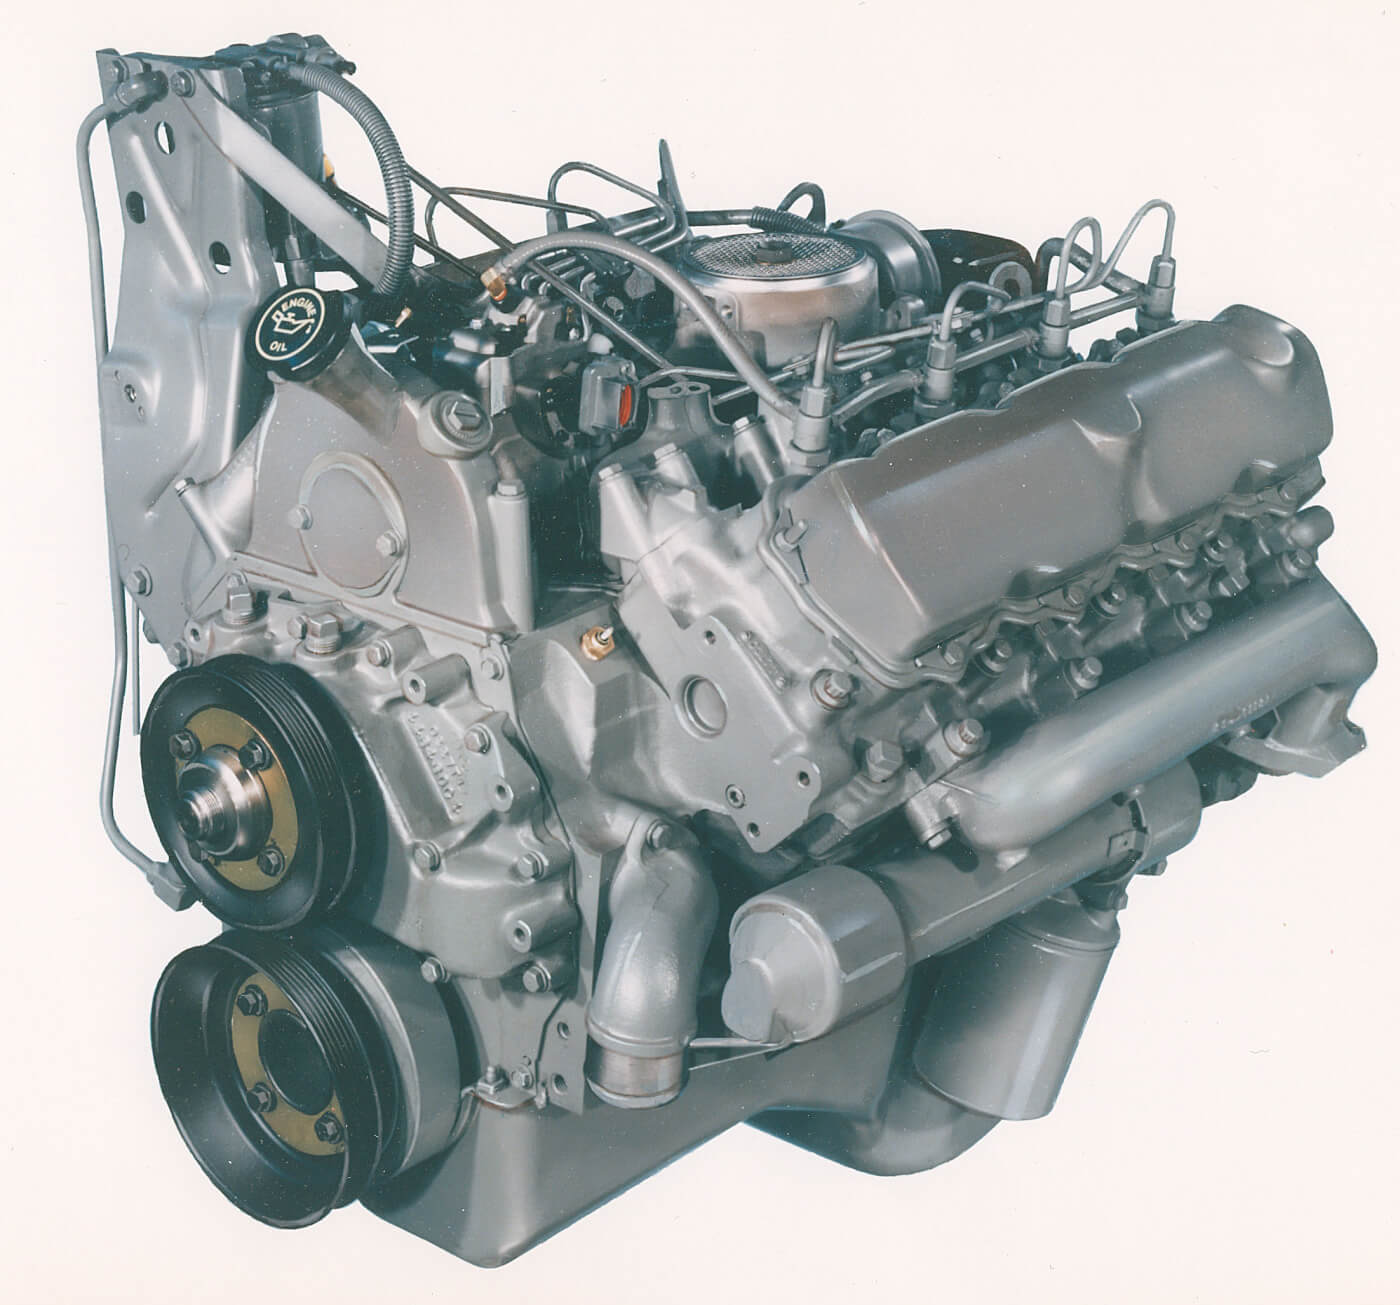 In 1988, the 7.3L IDI debuted touting a number of improvements. Power was advertised at 180 hp and torque bumped to 338 lb-ft. The 7.3L blocks can be distinguished by a 10809000C1 casting number. With the heads off, they can be identified by their round coolant ports at the corners of the block deck, as opposed to the triangular ports on the 6.9. The 7.3 also benefitted from larger head bolts (1/2-inch vs. 7/16-inch) and of course the larger bore. Thinner cylinder walls, changes in coolant flow and an increased tendency towards core shift made the 7.3 vulnerable to cavitation and pinholes from the water jacket into the cylinder. The oil filler was cast into the pump gear cover. This is a 1992 engine, which featured the serpentine belt system.